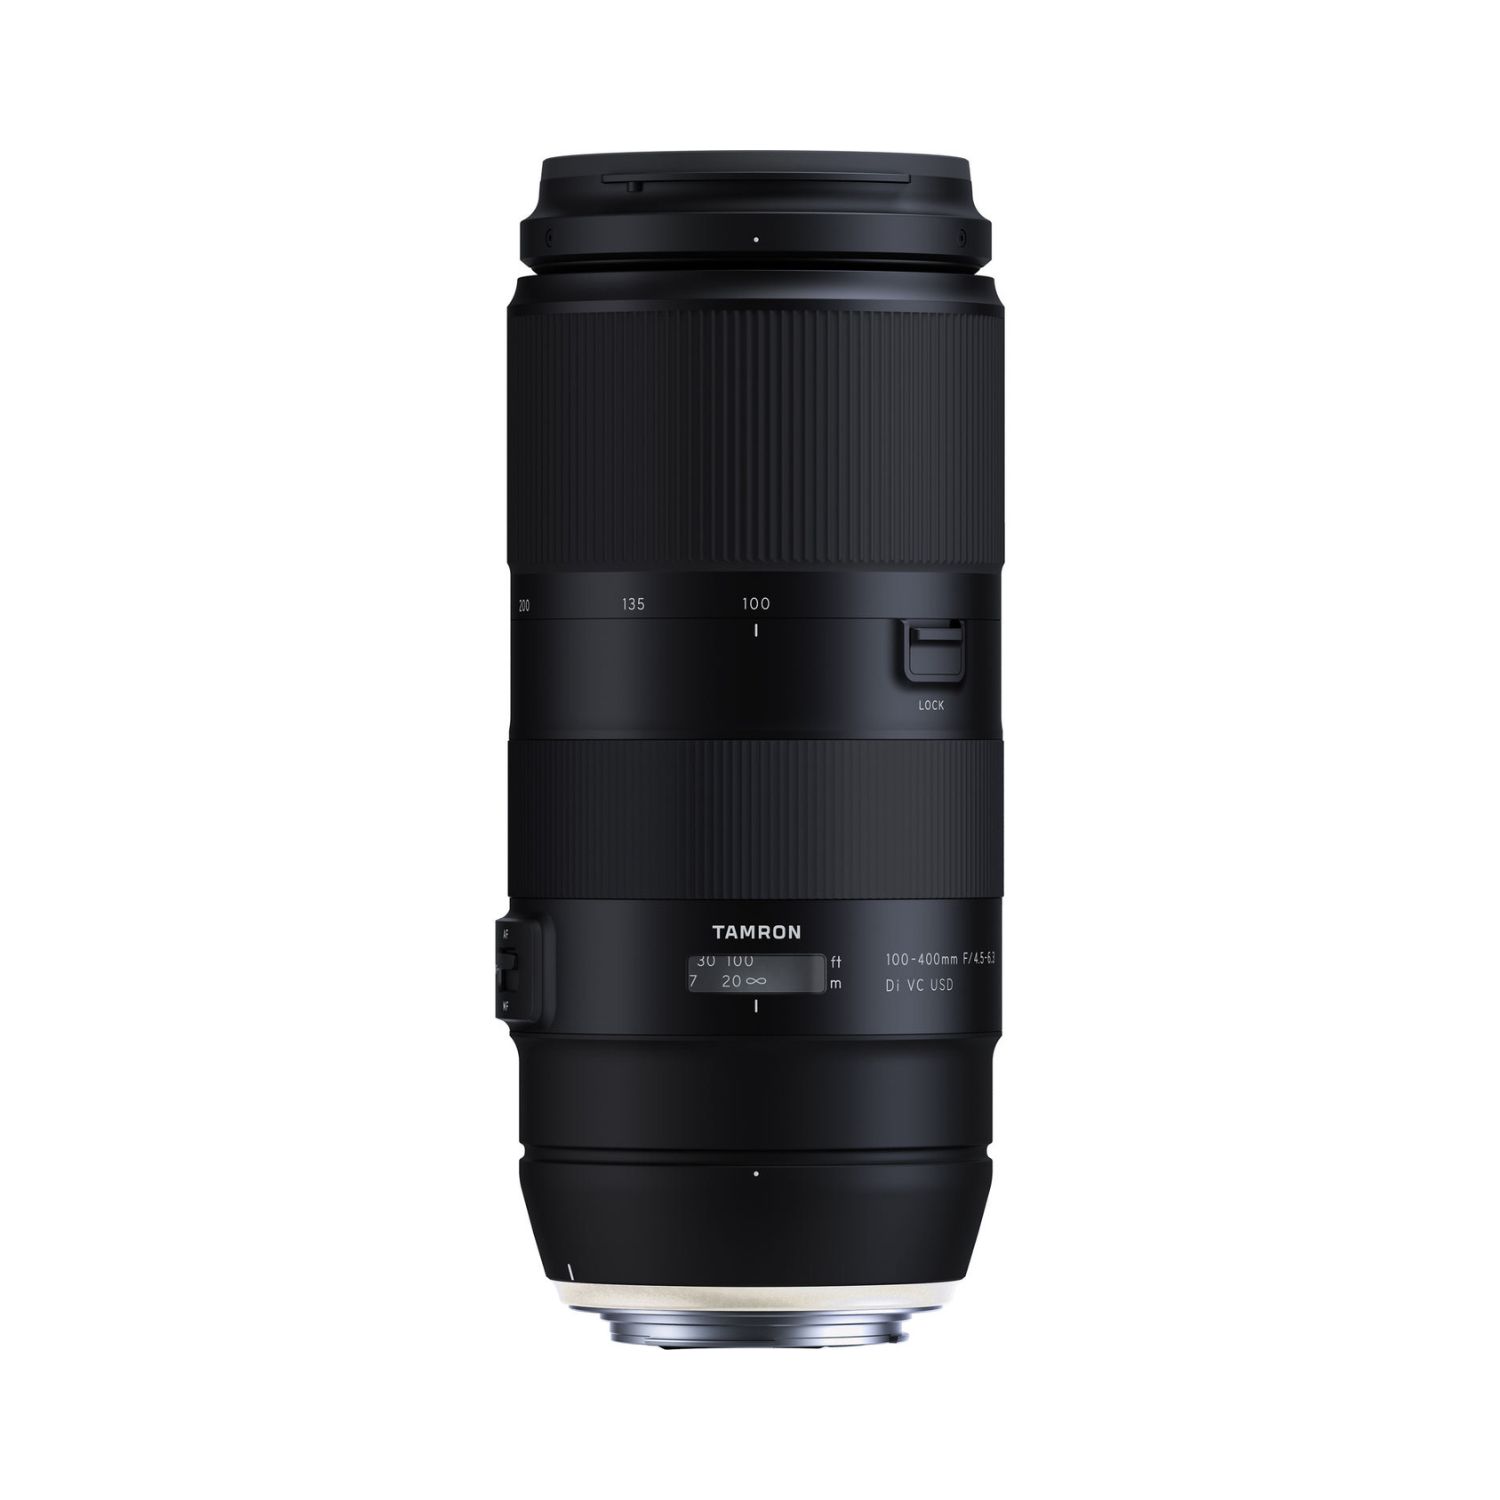 Buy Tamron 100-400mm F4.5-6.3 Di VC USD Online in India